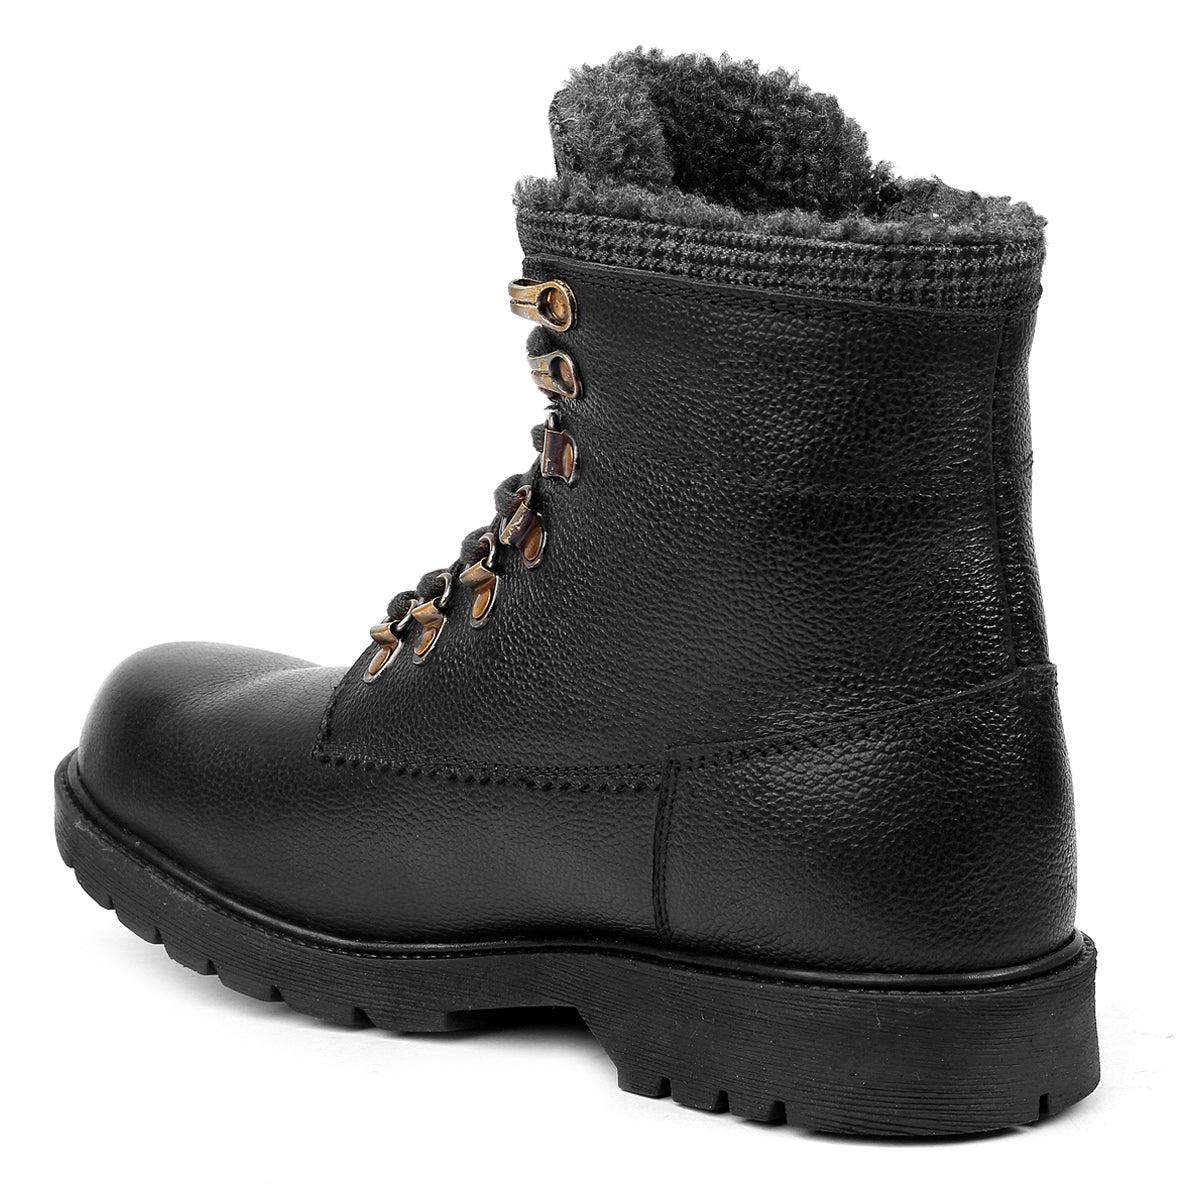 waterproof boots for men, mens snow boots, high ankle boots, genuine leather boots